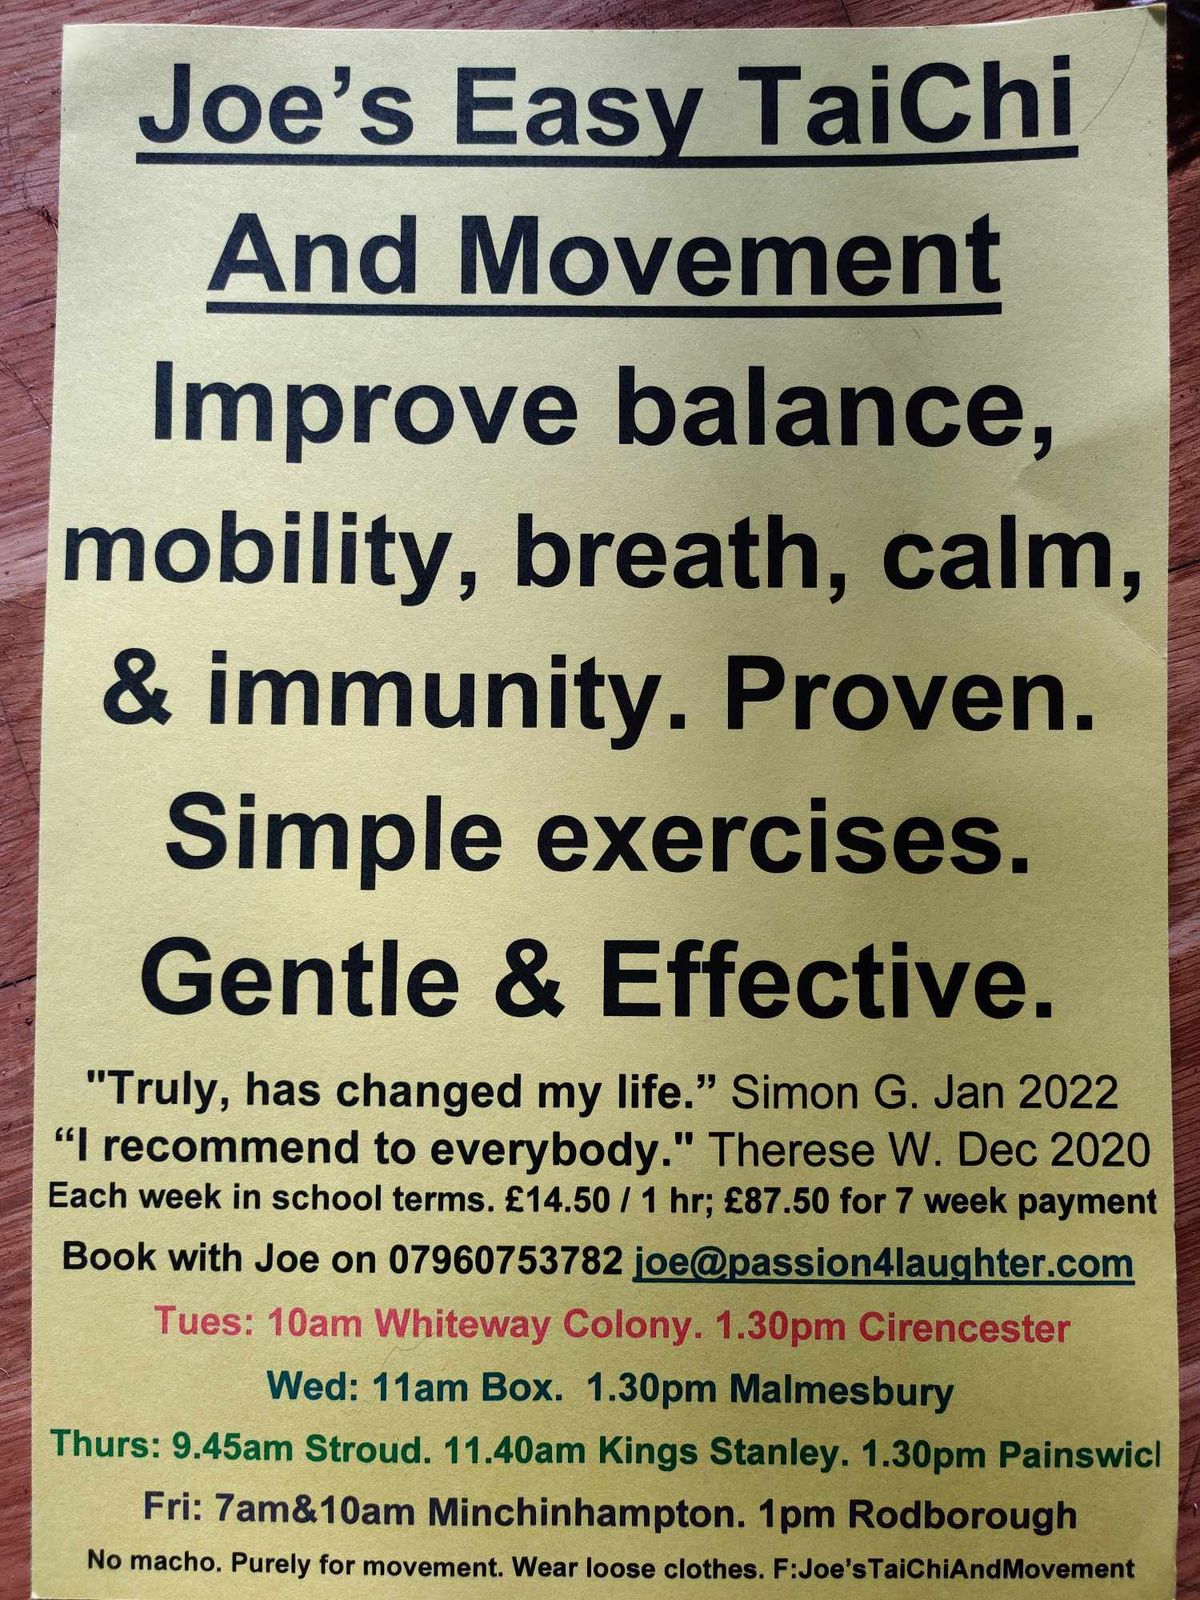 Joe's Easy TaiChi And Movement. Painswick 1.30pm Thursdays. Plus 9 more groups in the area.